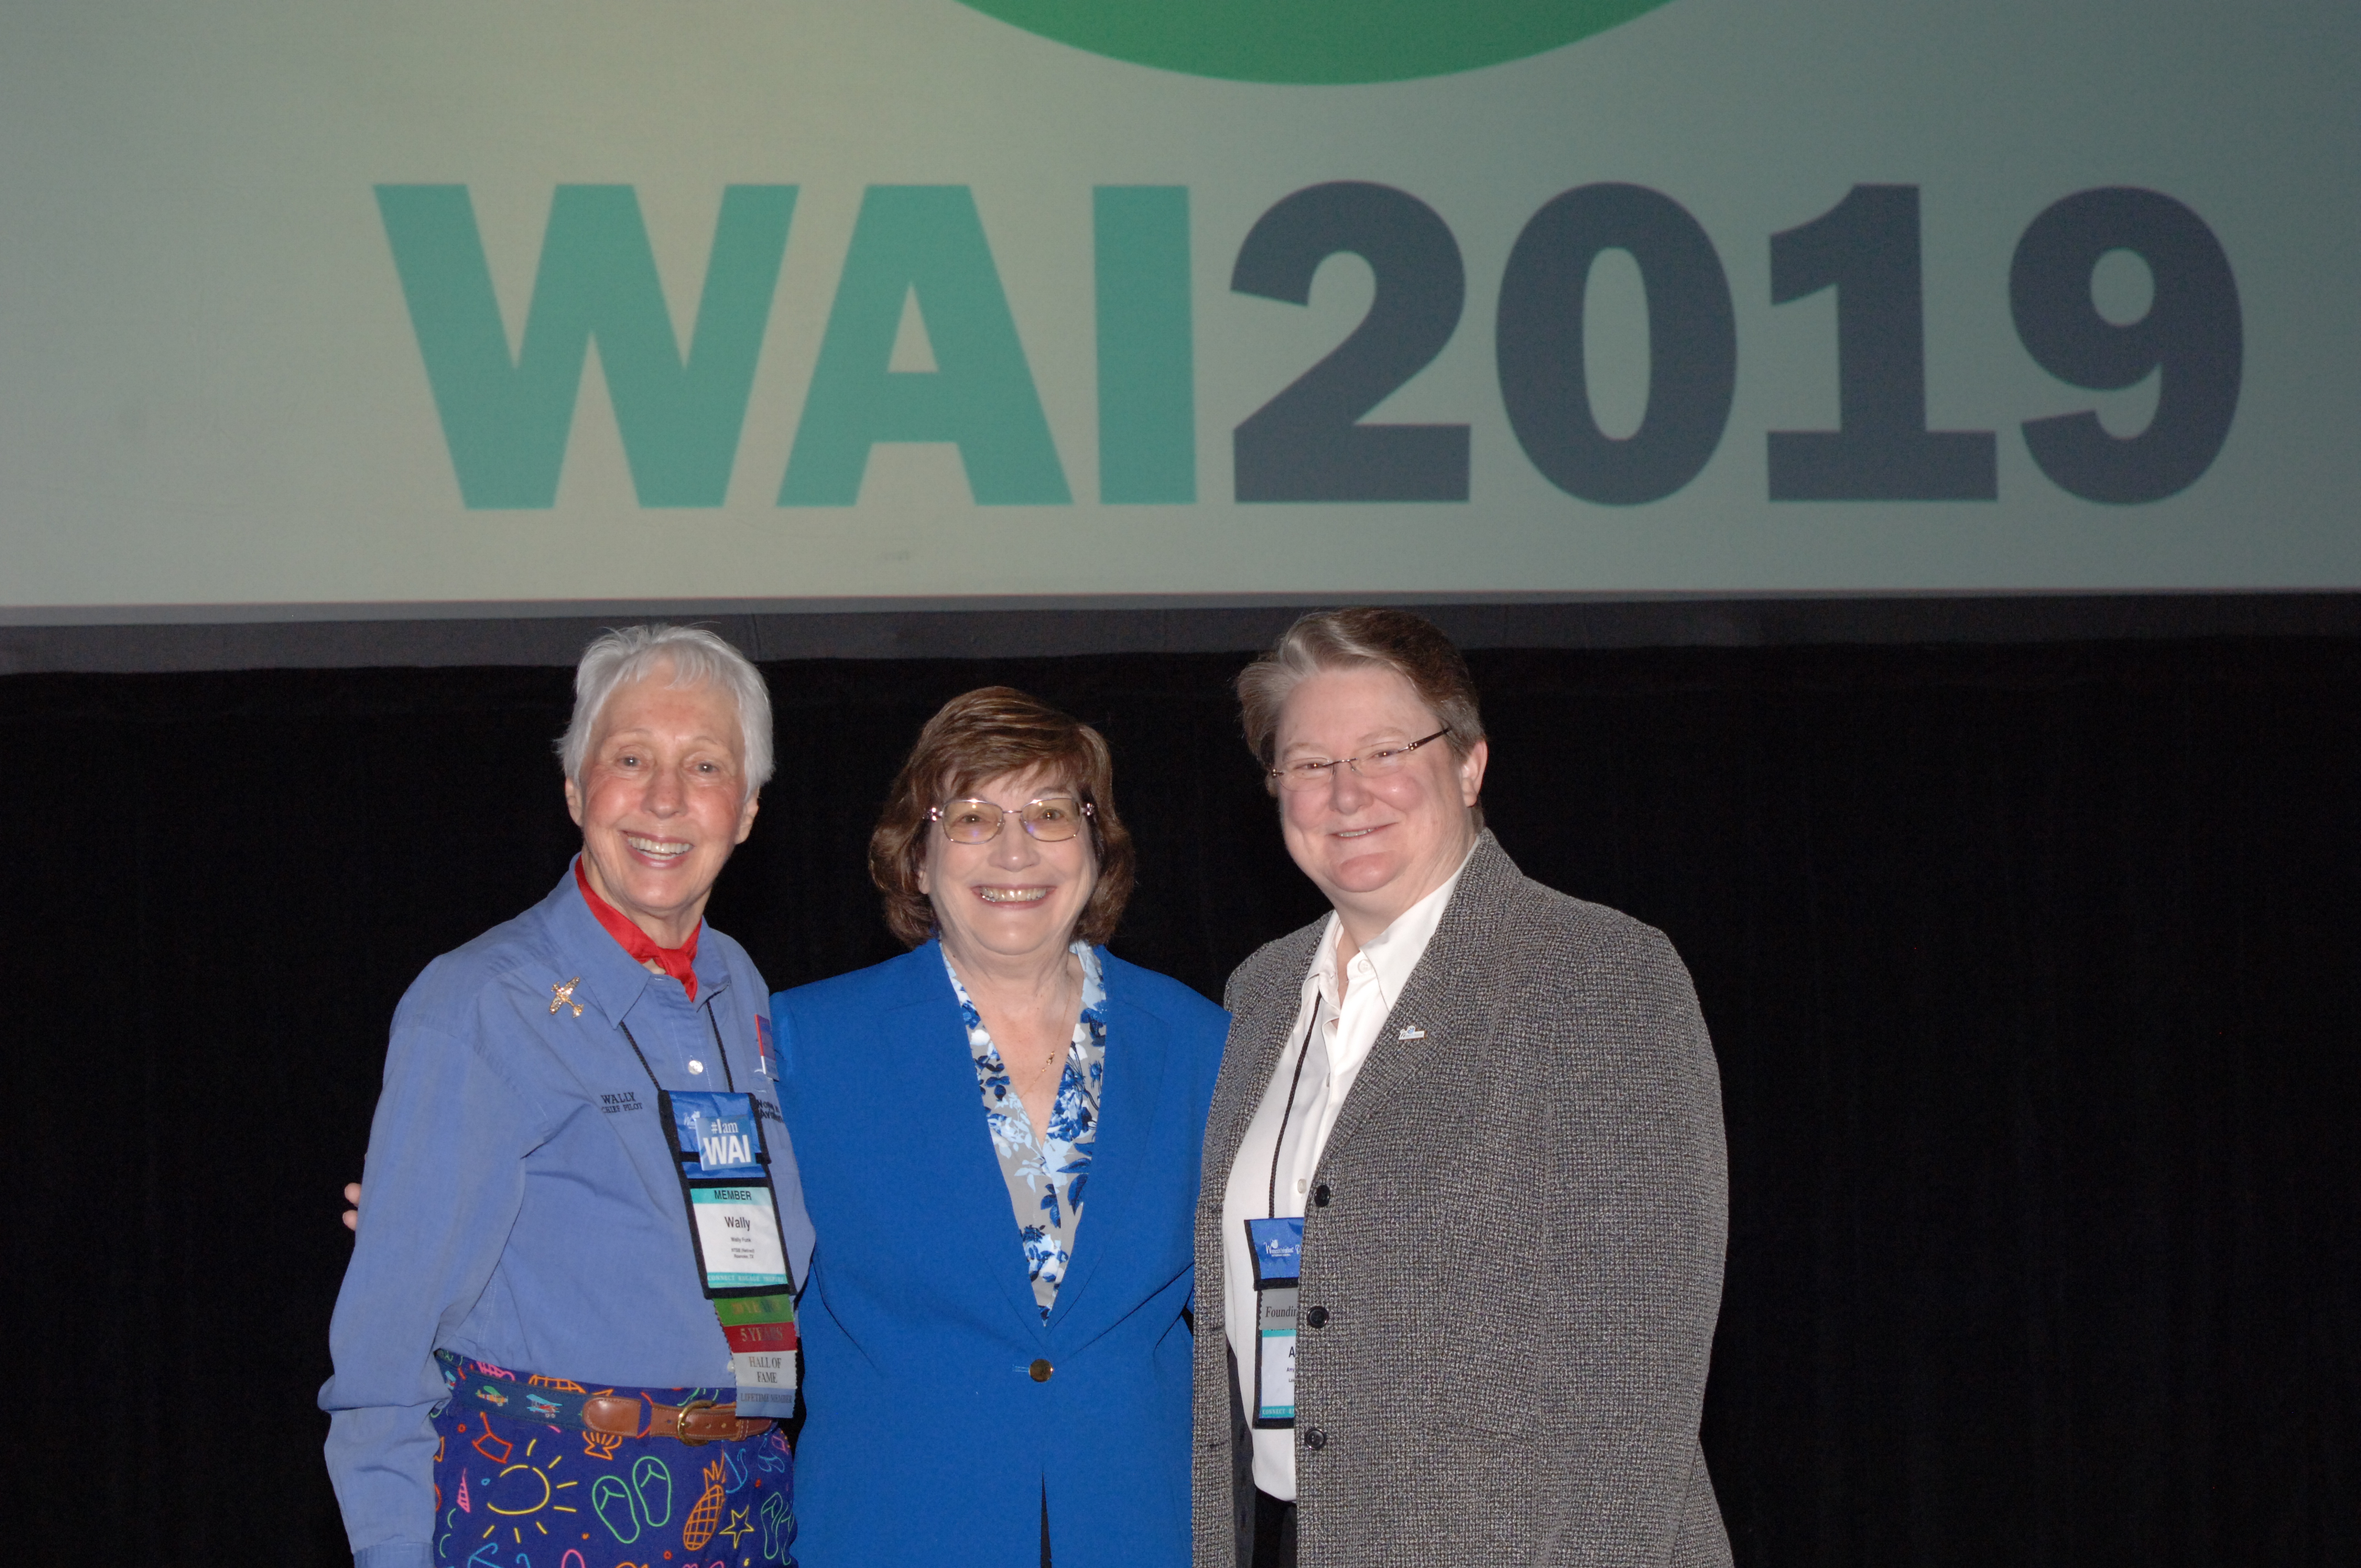 30 year WAI attendees Wally Funk, Peggy Chabrian, and Amy Carmien